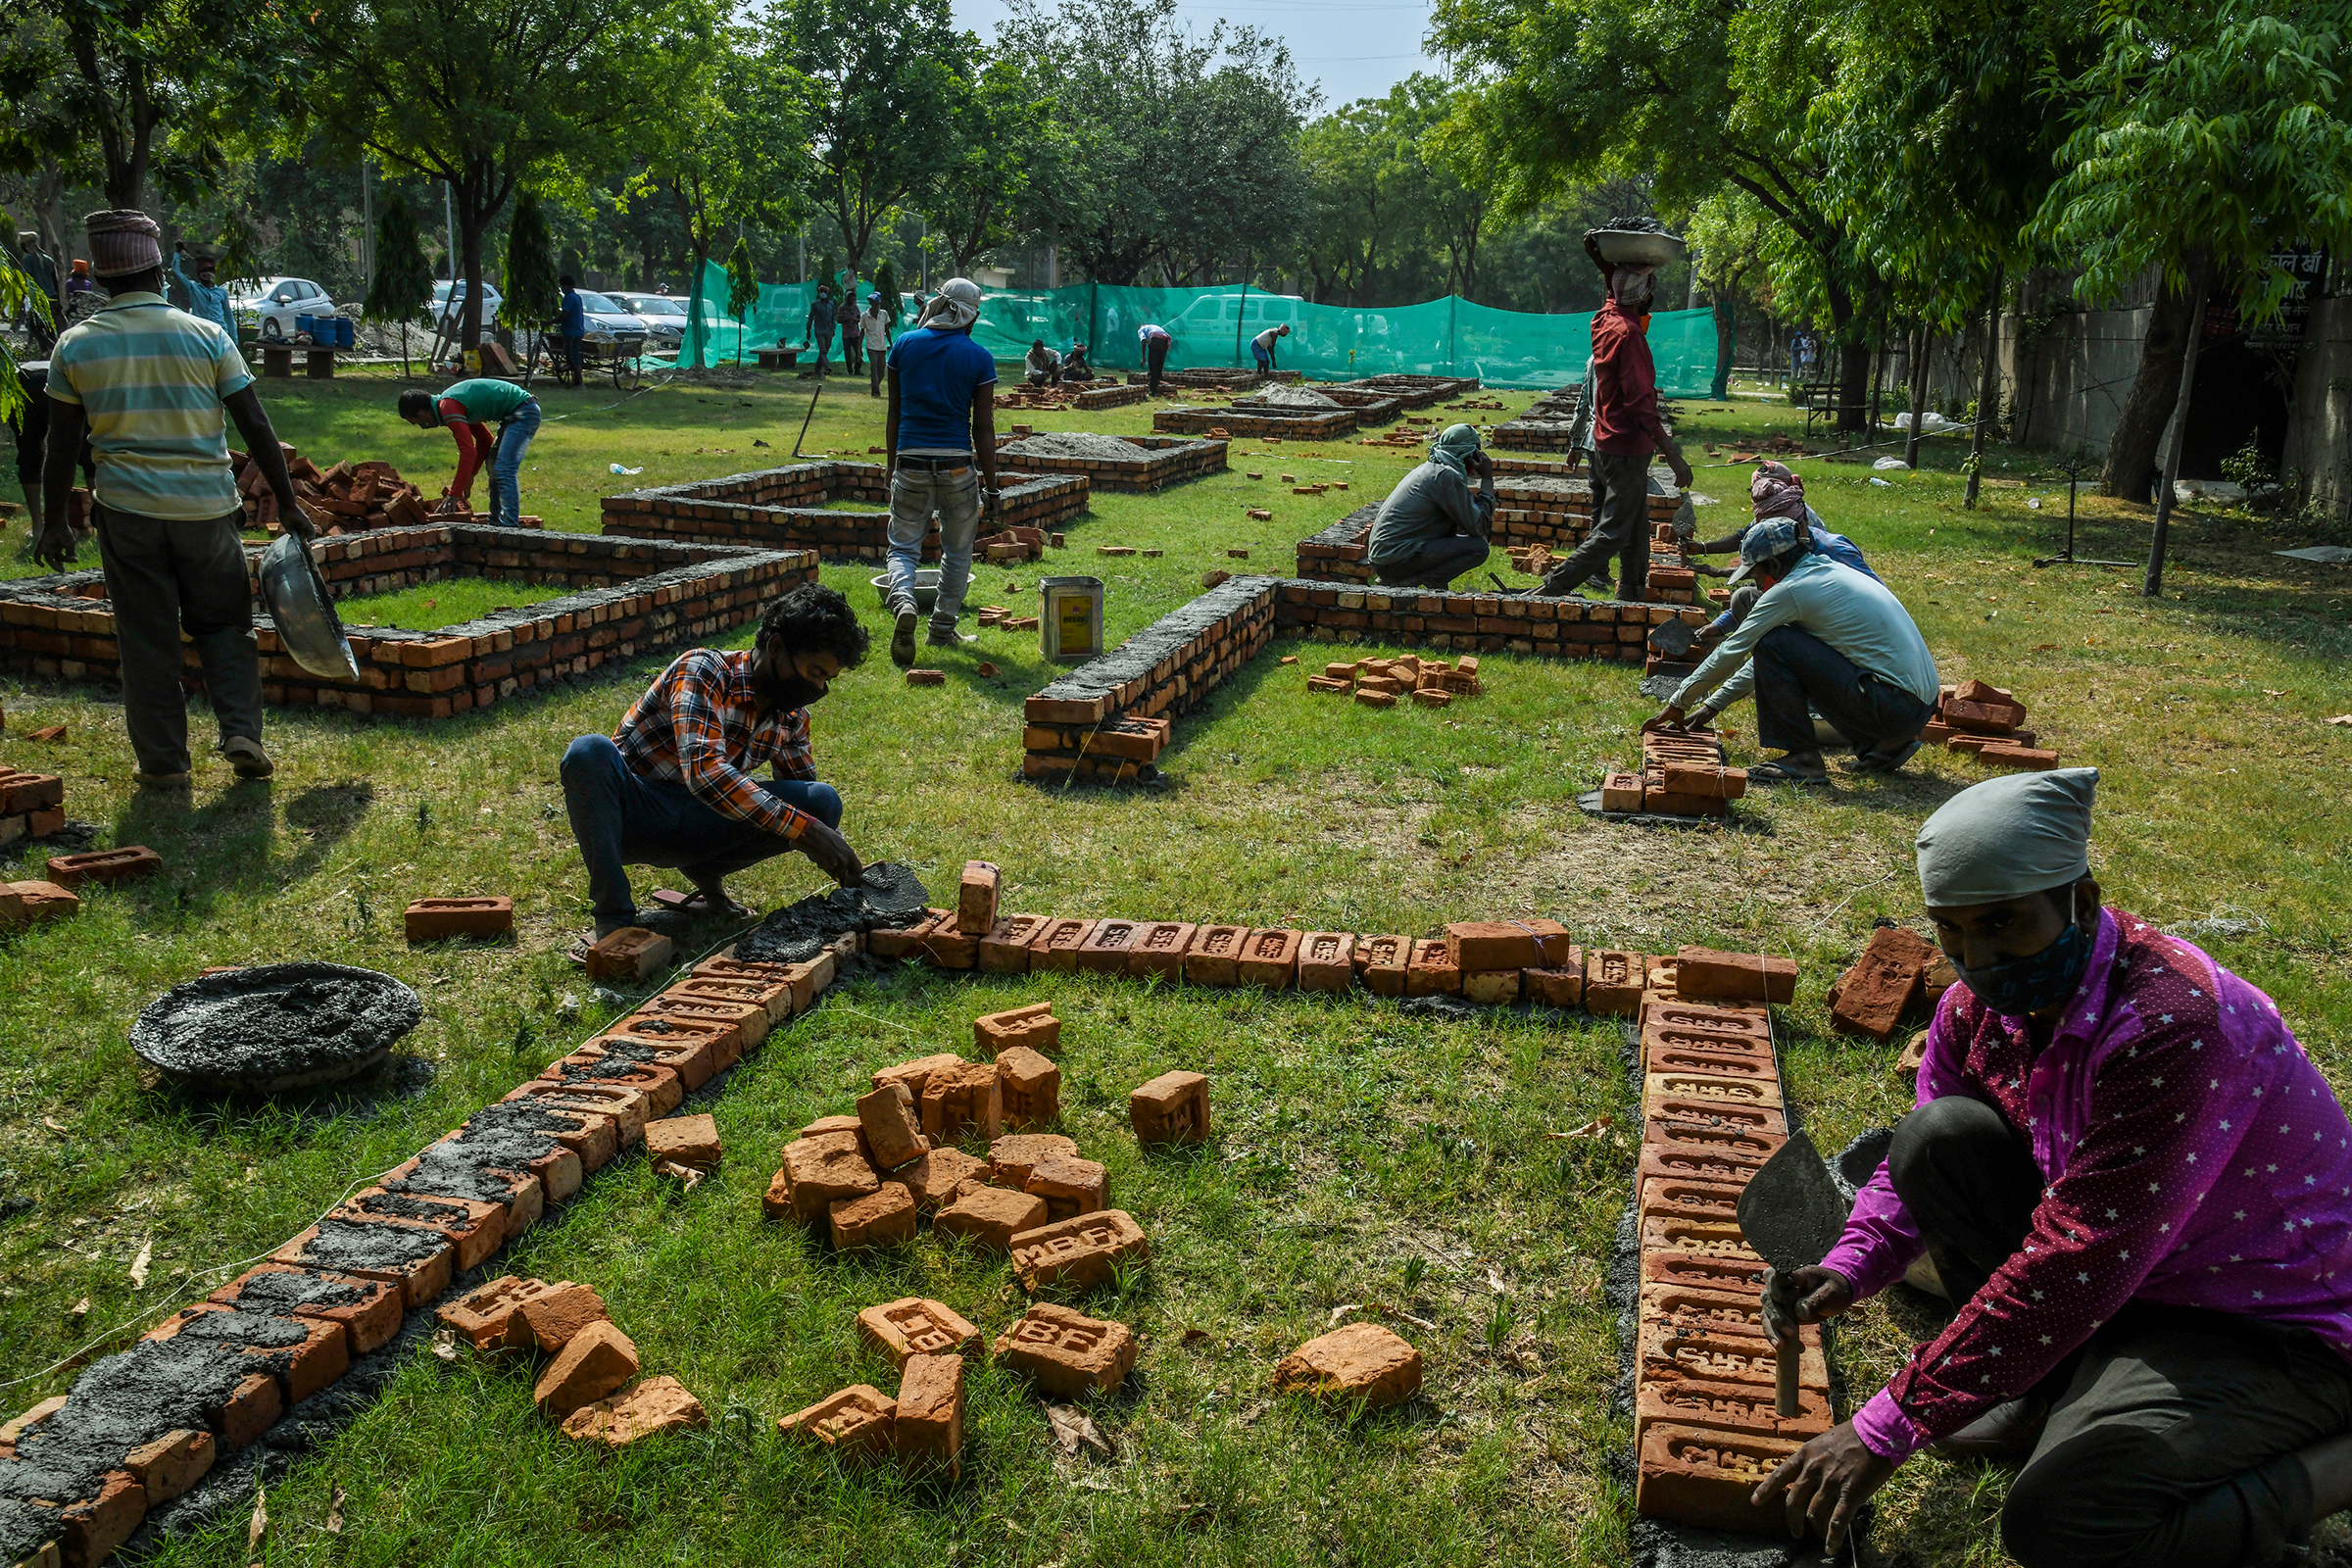 Workers build new platforms to expand a mass cremation site in New Delhi on April 27. (Atul Loke—The New York Times/Redux)